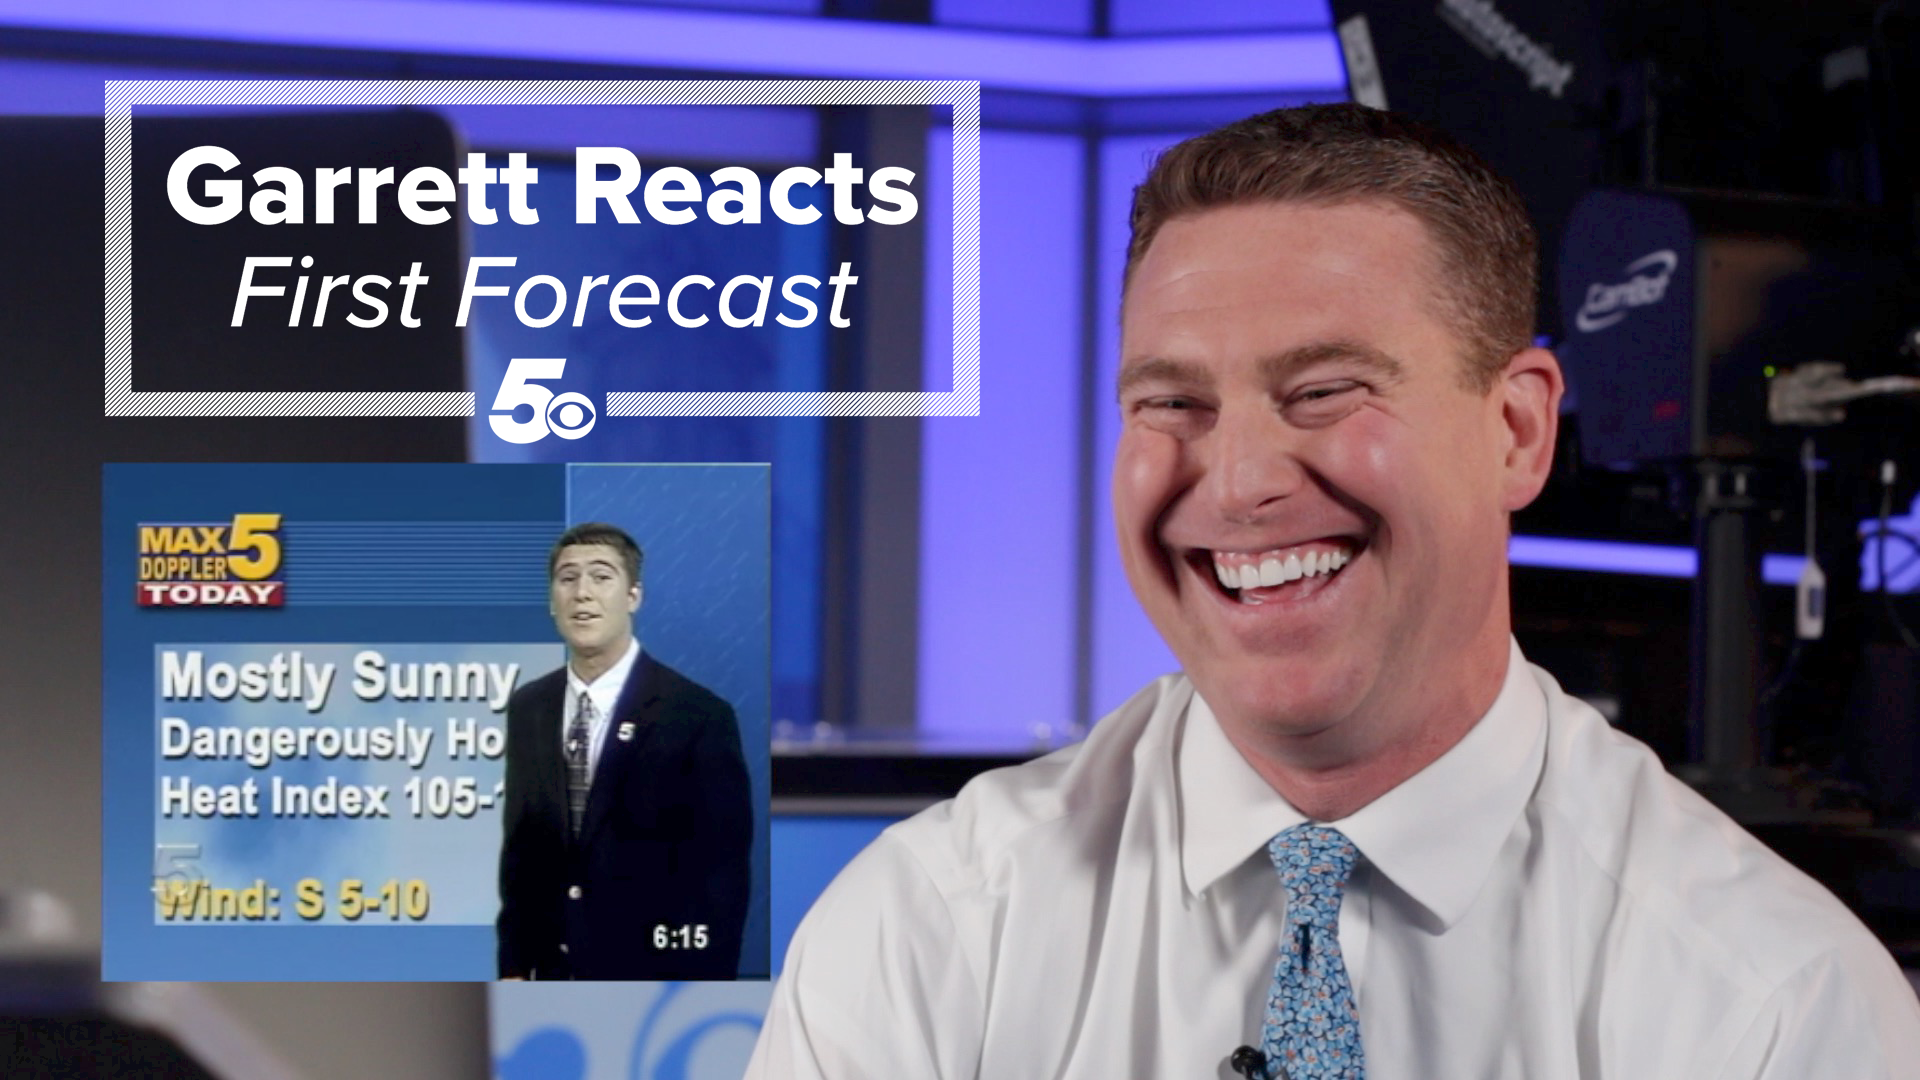 We're celebrating all things Garrett Lewis this month. Check out Garrett's reaction to his first live forecast on Channel 5.